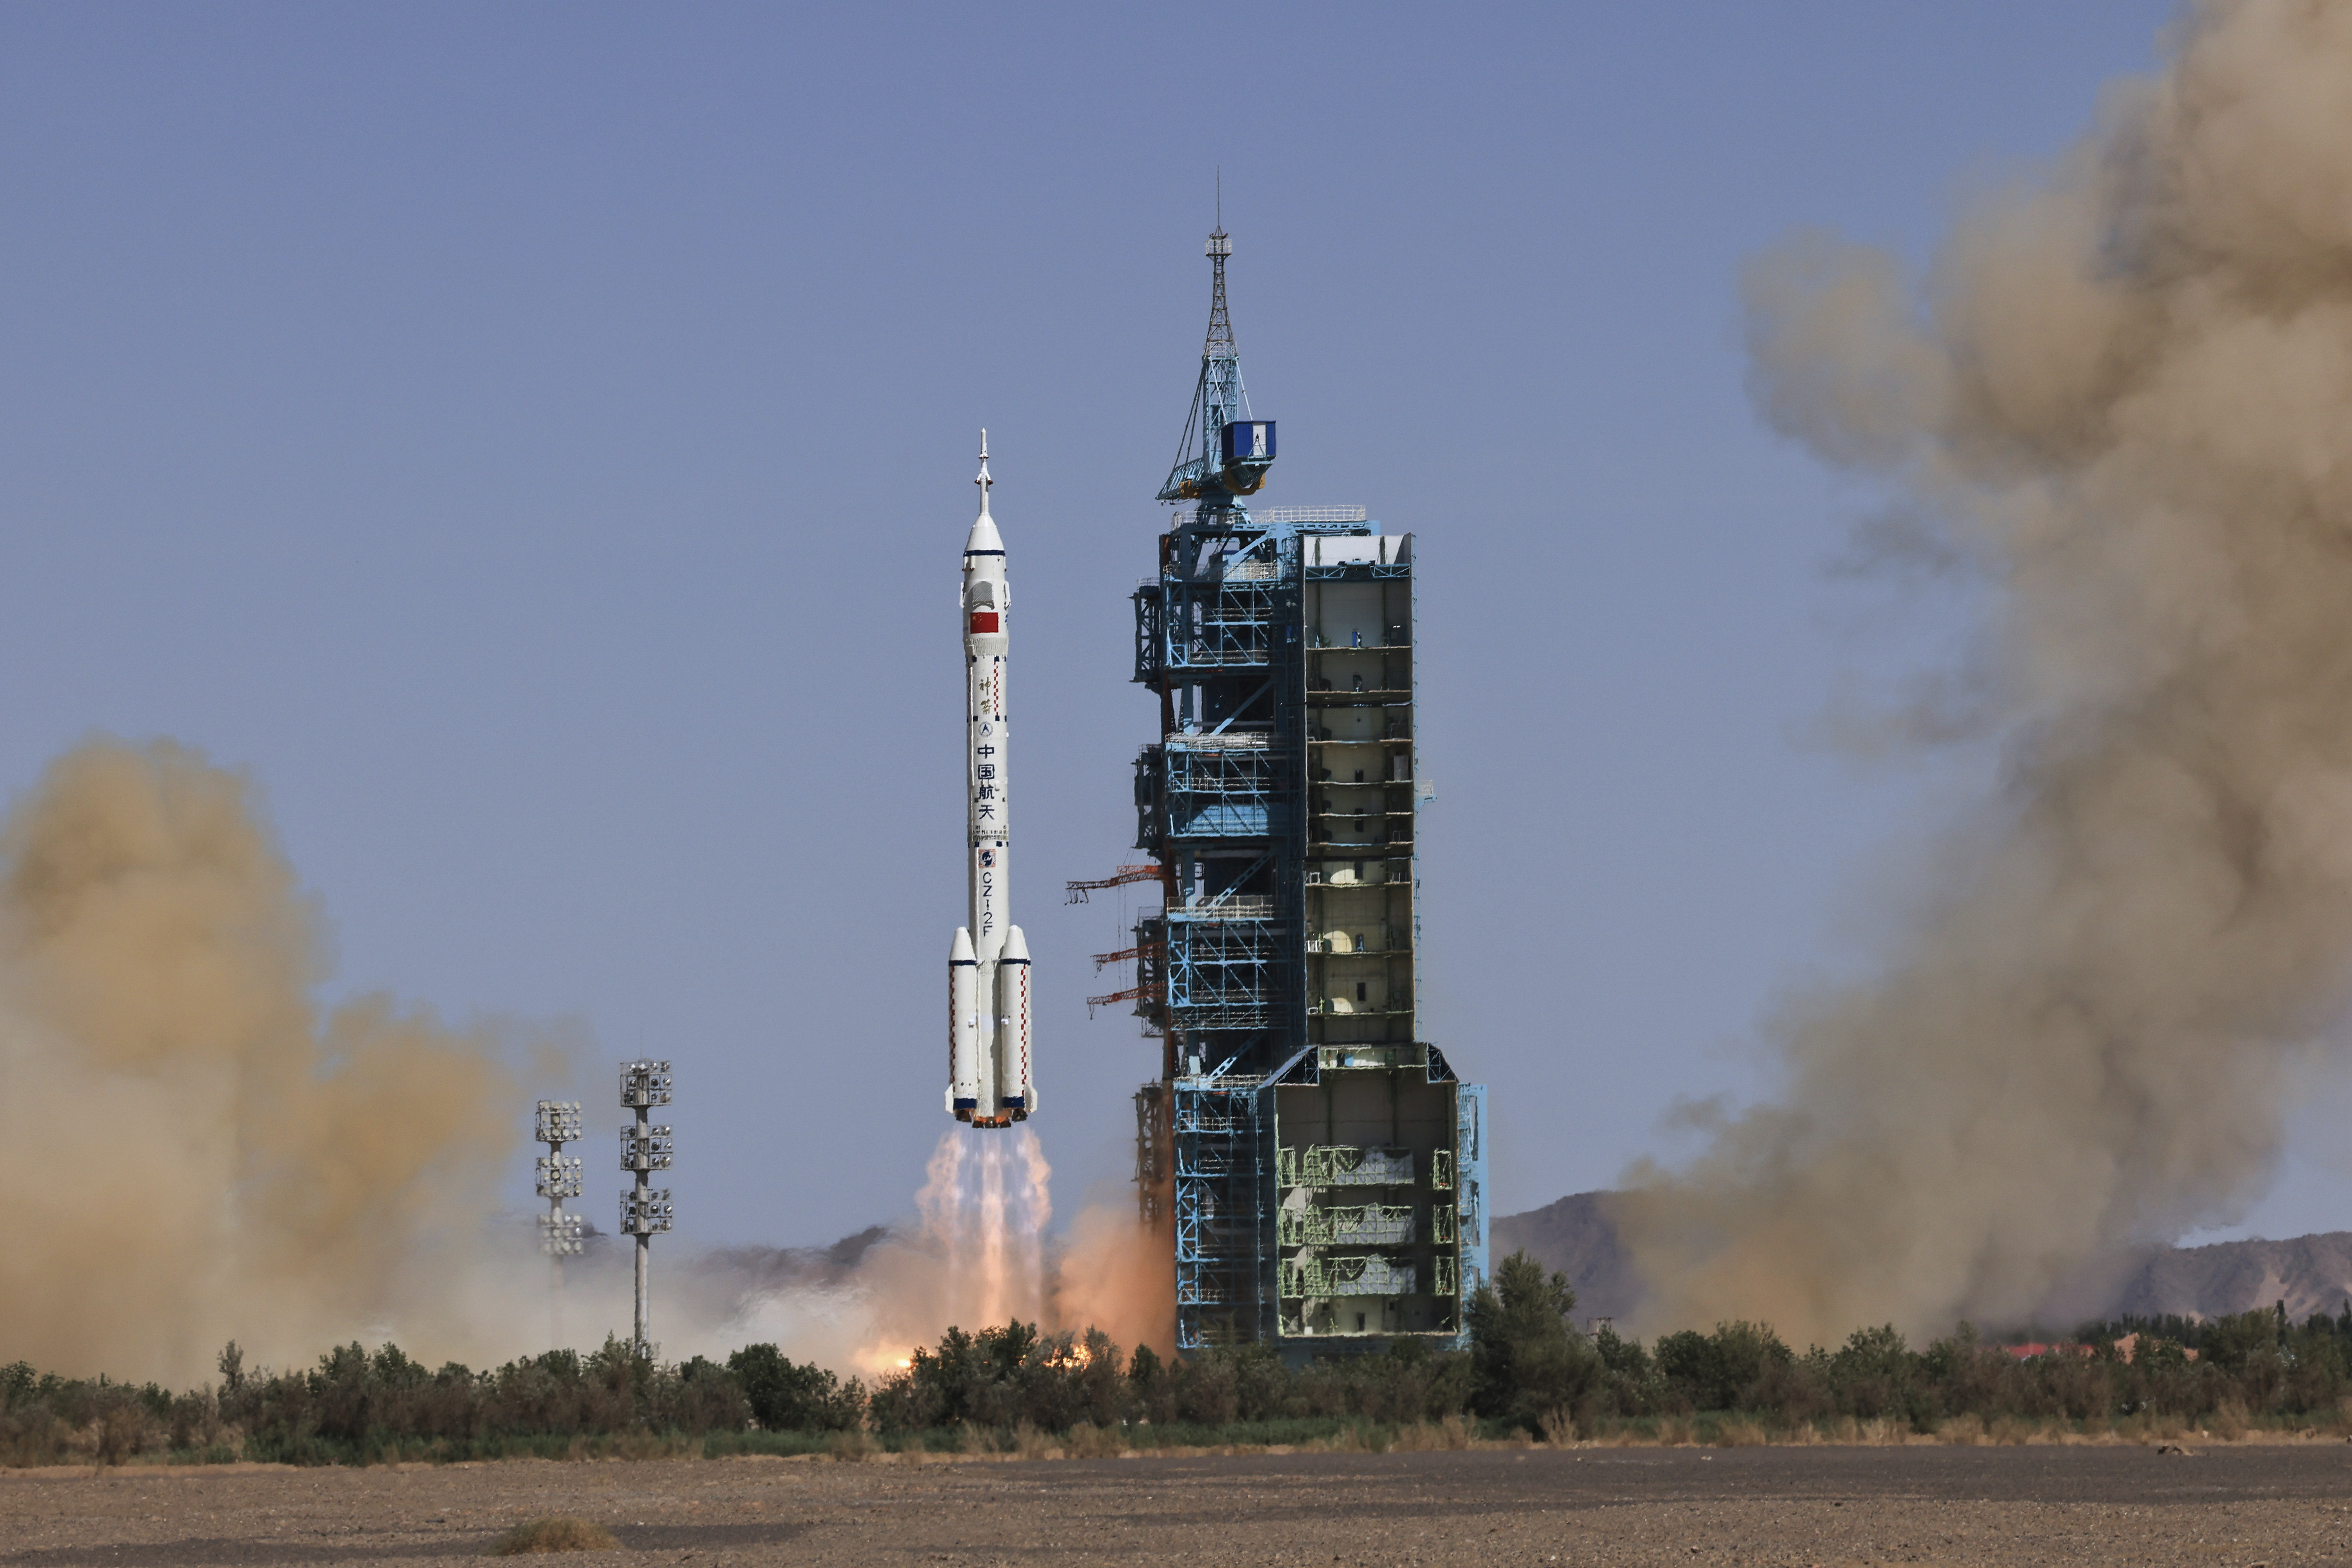 he Long March-2F carrier rocket carrying China's Shenzhou 14 spacecraft blasts off from the launch pad at the Jiuquan Satellite Launch Center in Jiuquan